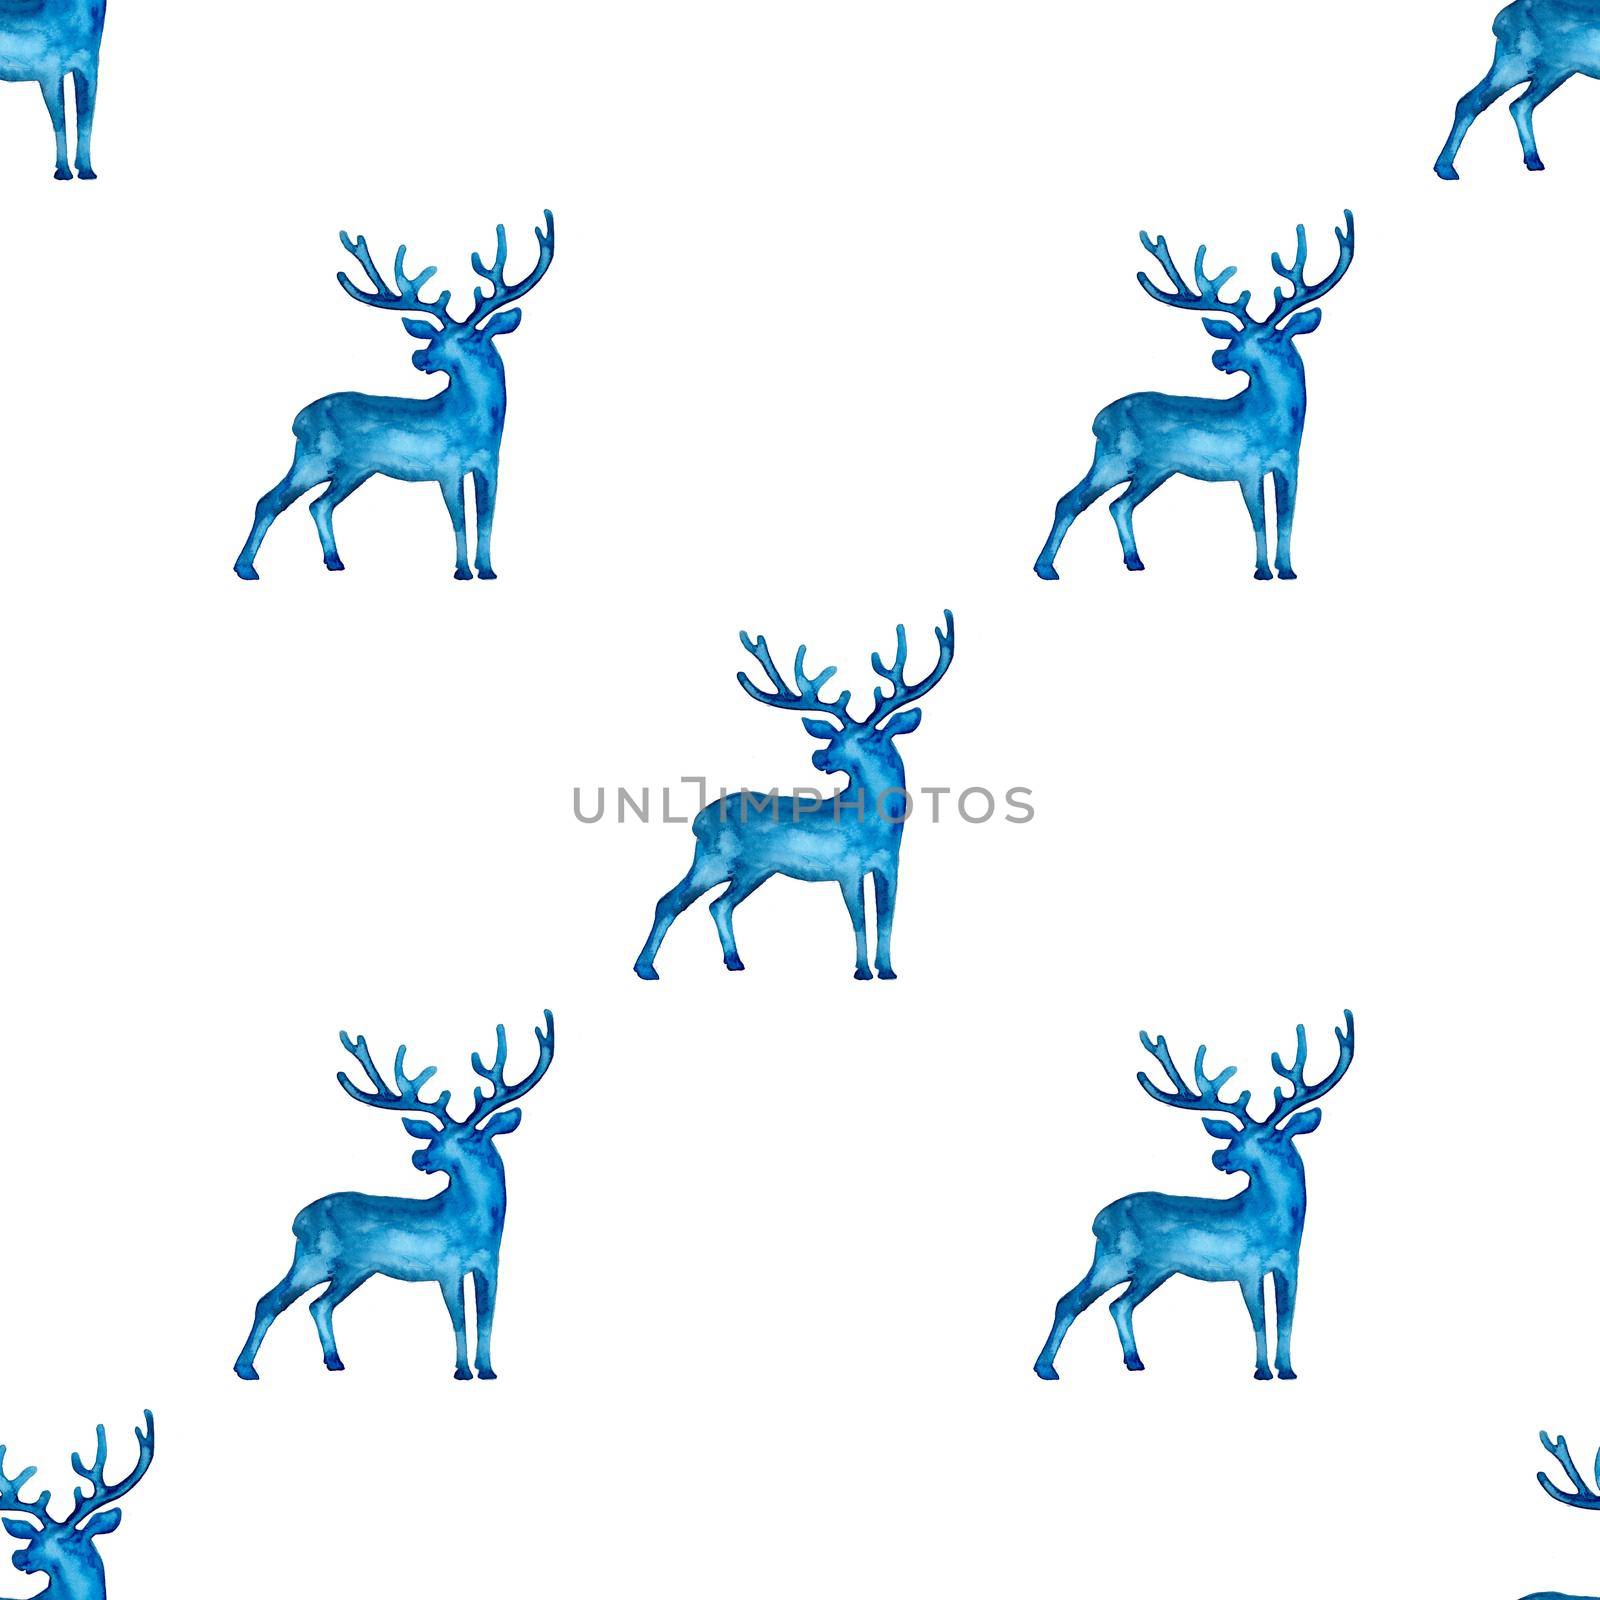 Reindeer XMAS watercolor Deer Stag eamless Pattern in Blue Color. Hand Painted Animal Moose background or wallpaper for Ornament, Wrapping or Christmas Gift by DesignAB